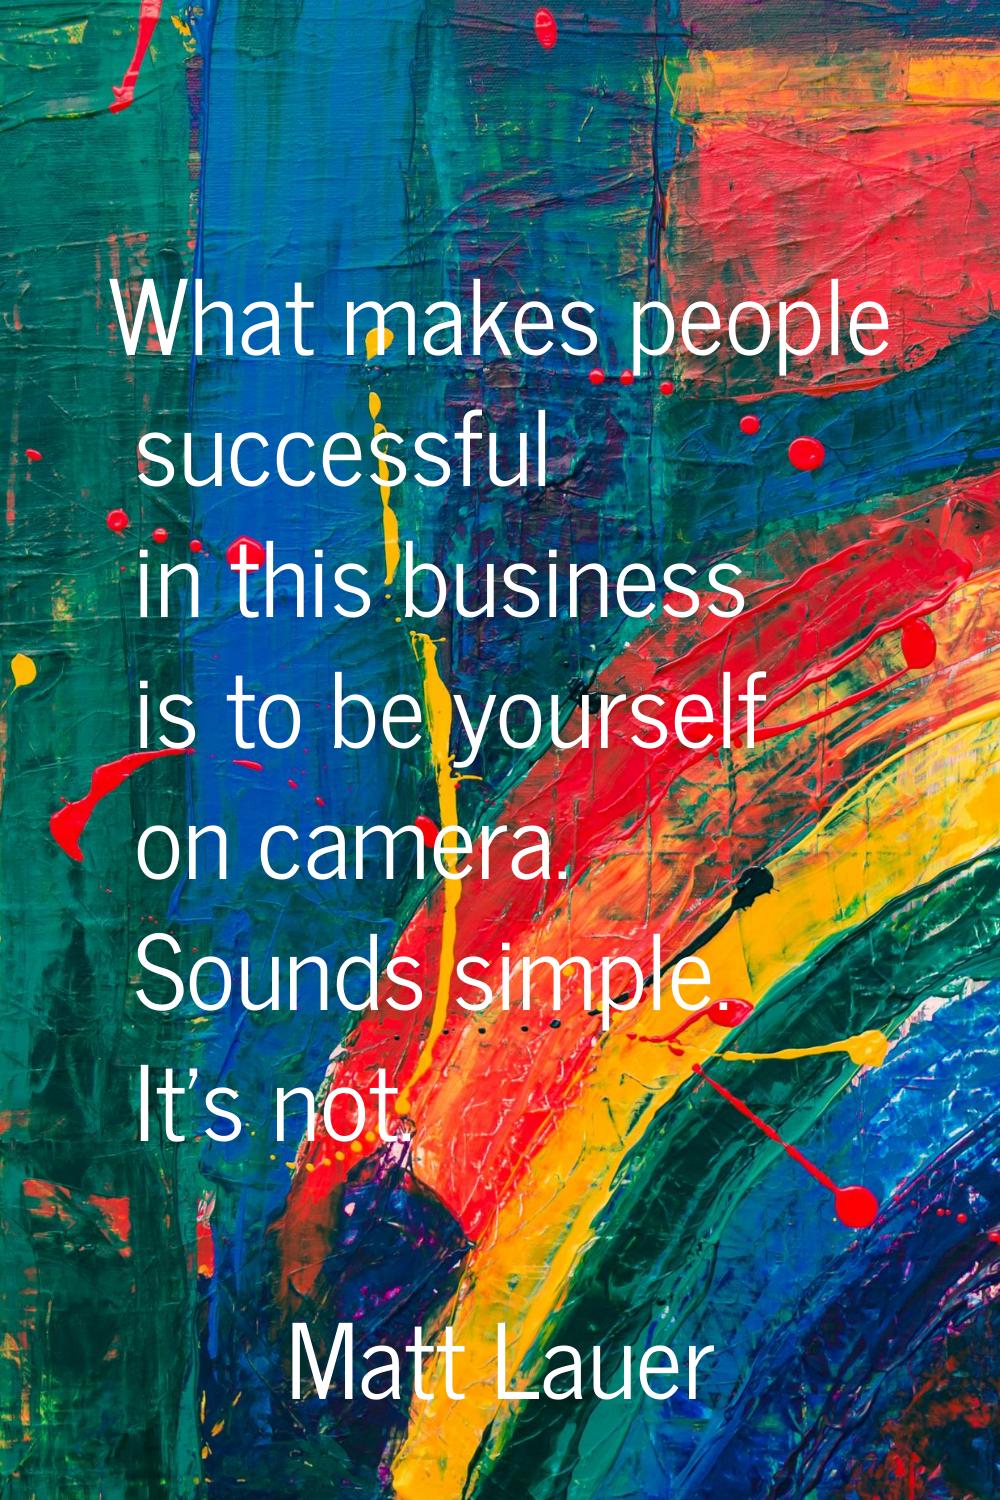 What makes people successful in this business is to be yourself on camera. Sounds simple. It's not.